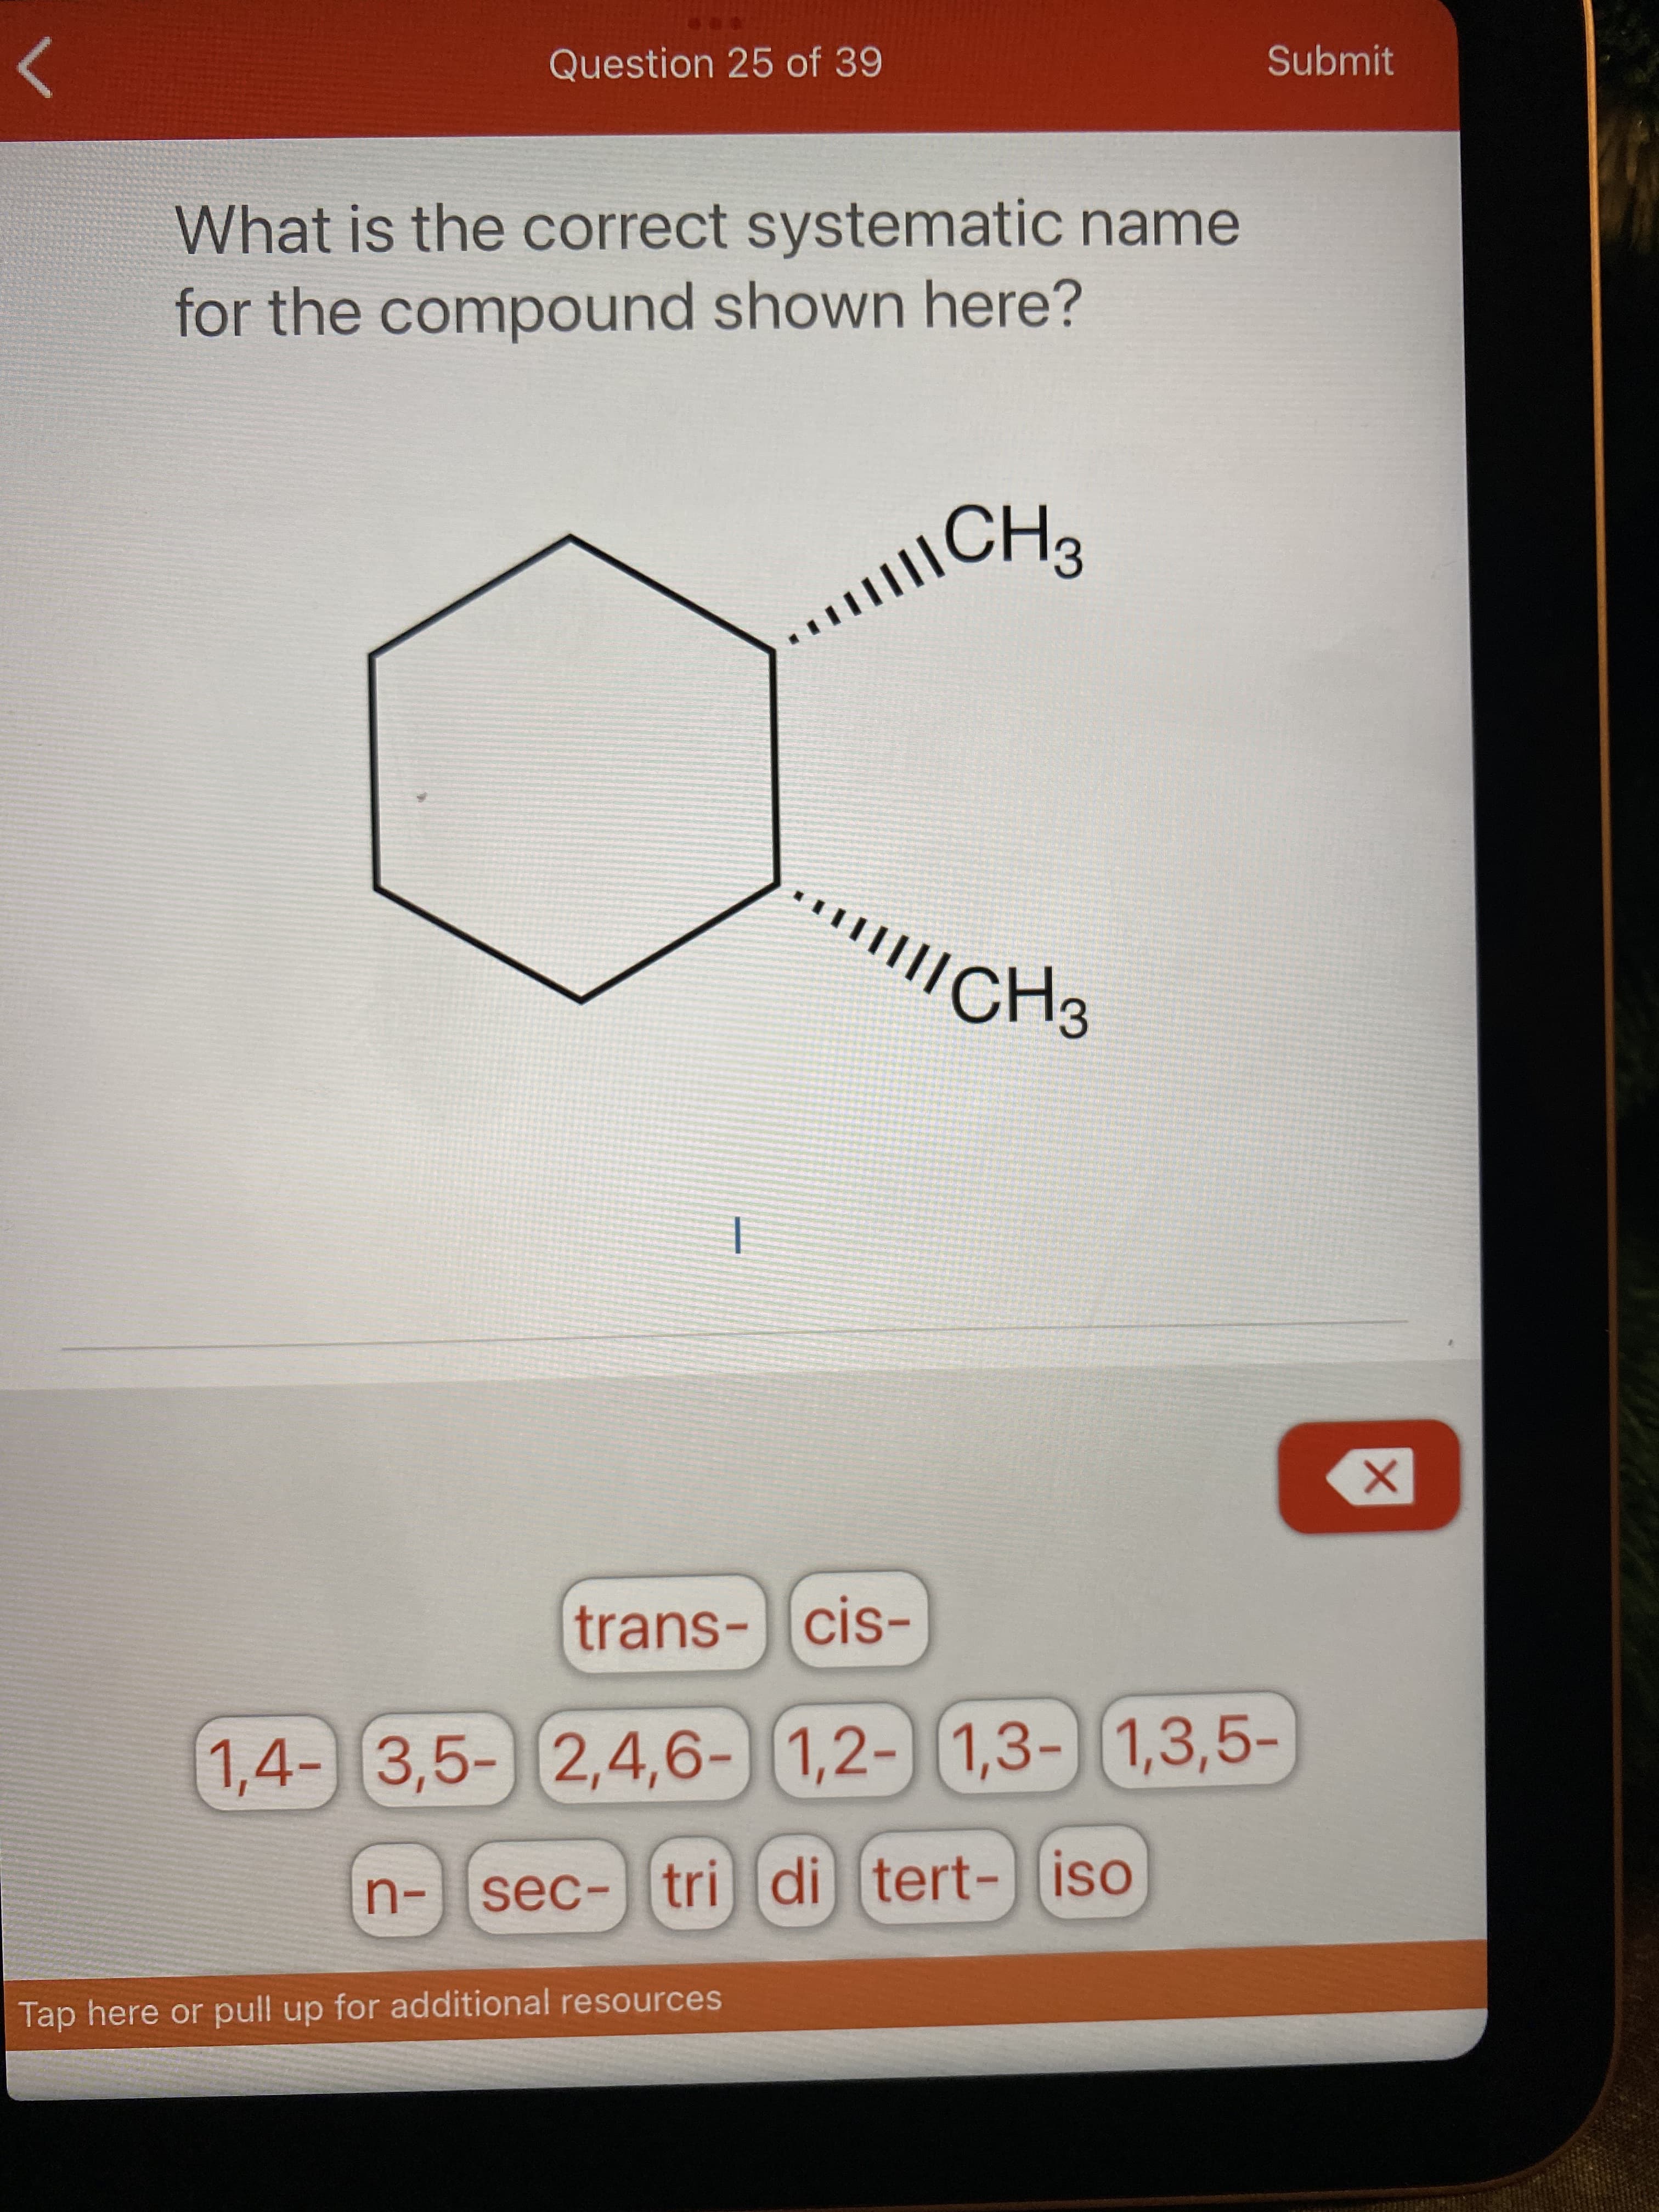 Question 25 of 39
Submit
What is the correct systematic name
for the compound shown here?
CH2
/CH3
trans-cis-
1,4-) 3,5- 2,4,6-
)
1,2-1,3- 1,3,5-
n-sec- tri di
tert-iso
Tap here or pull up for additional resources
